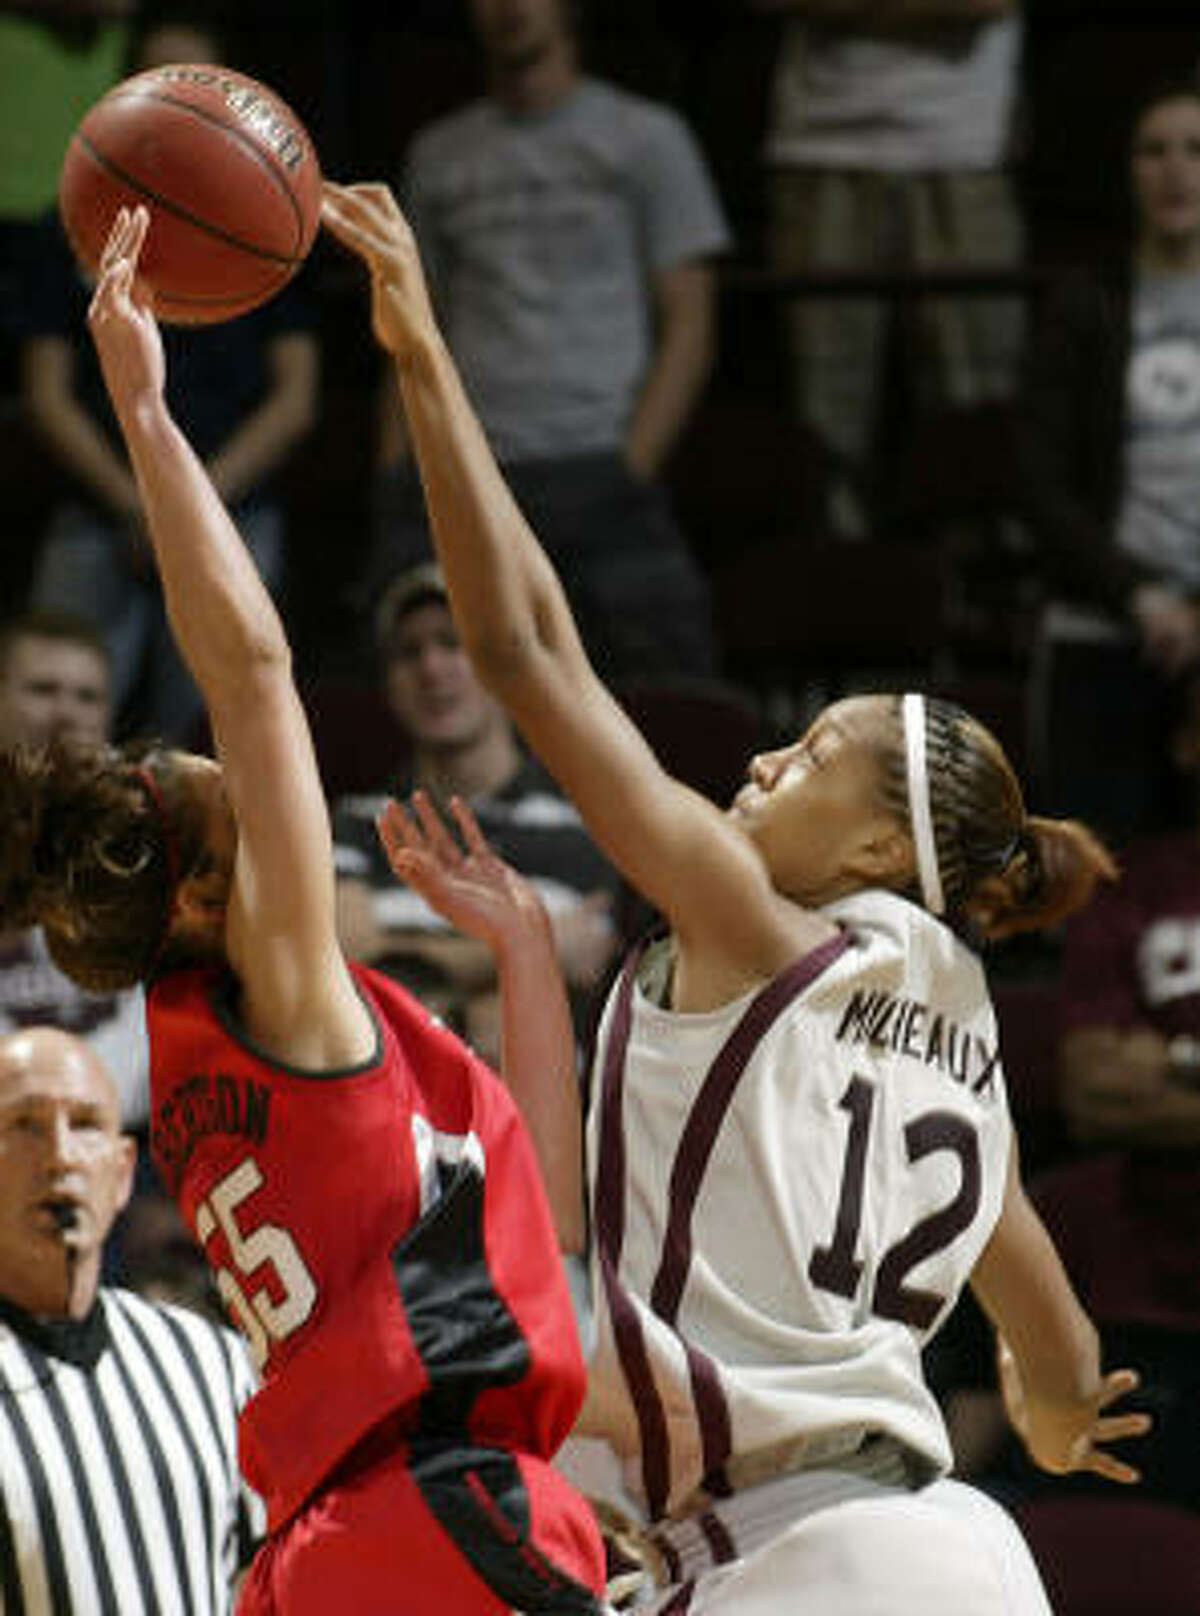 Texas Tech's Alesha Robertson, left, has her shot blocked by Texas A&M's La Toya Micheaux, one of career-high five blocks by Micheaux who also had her best rebounding game with 13.